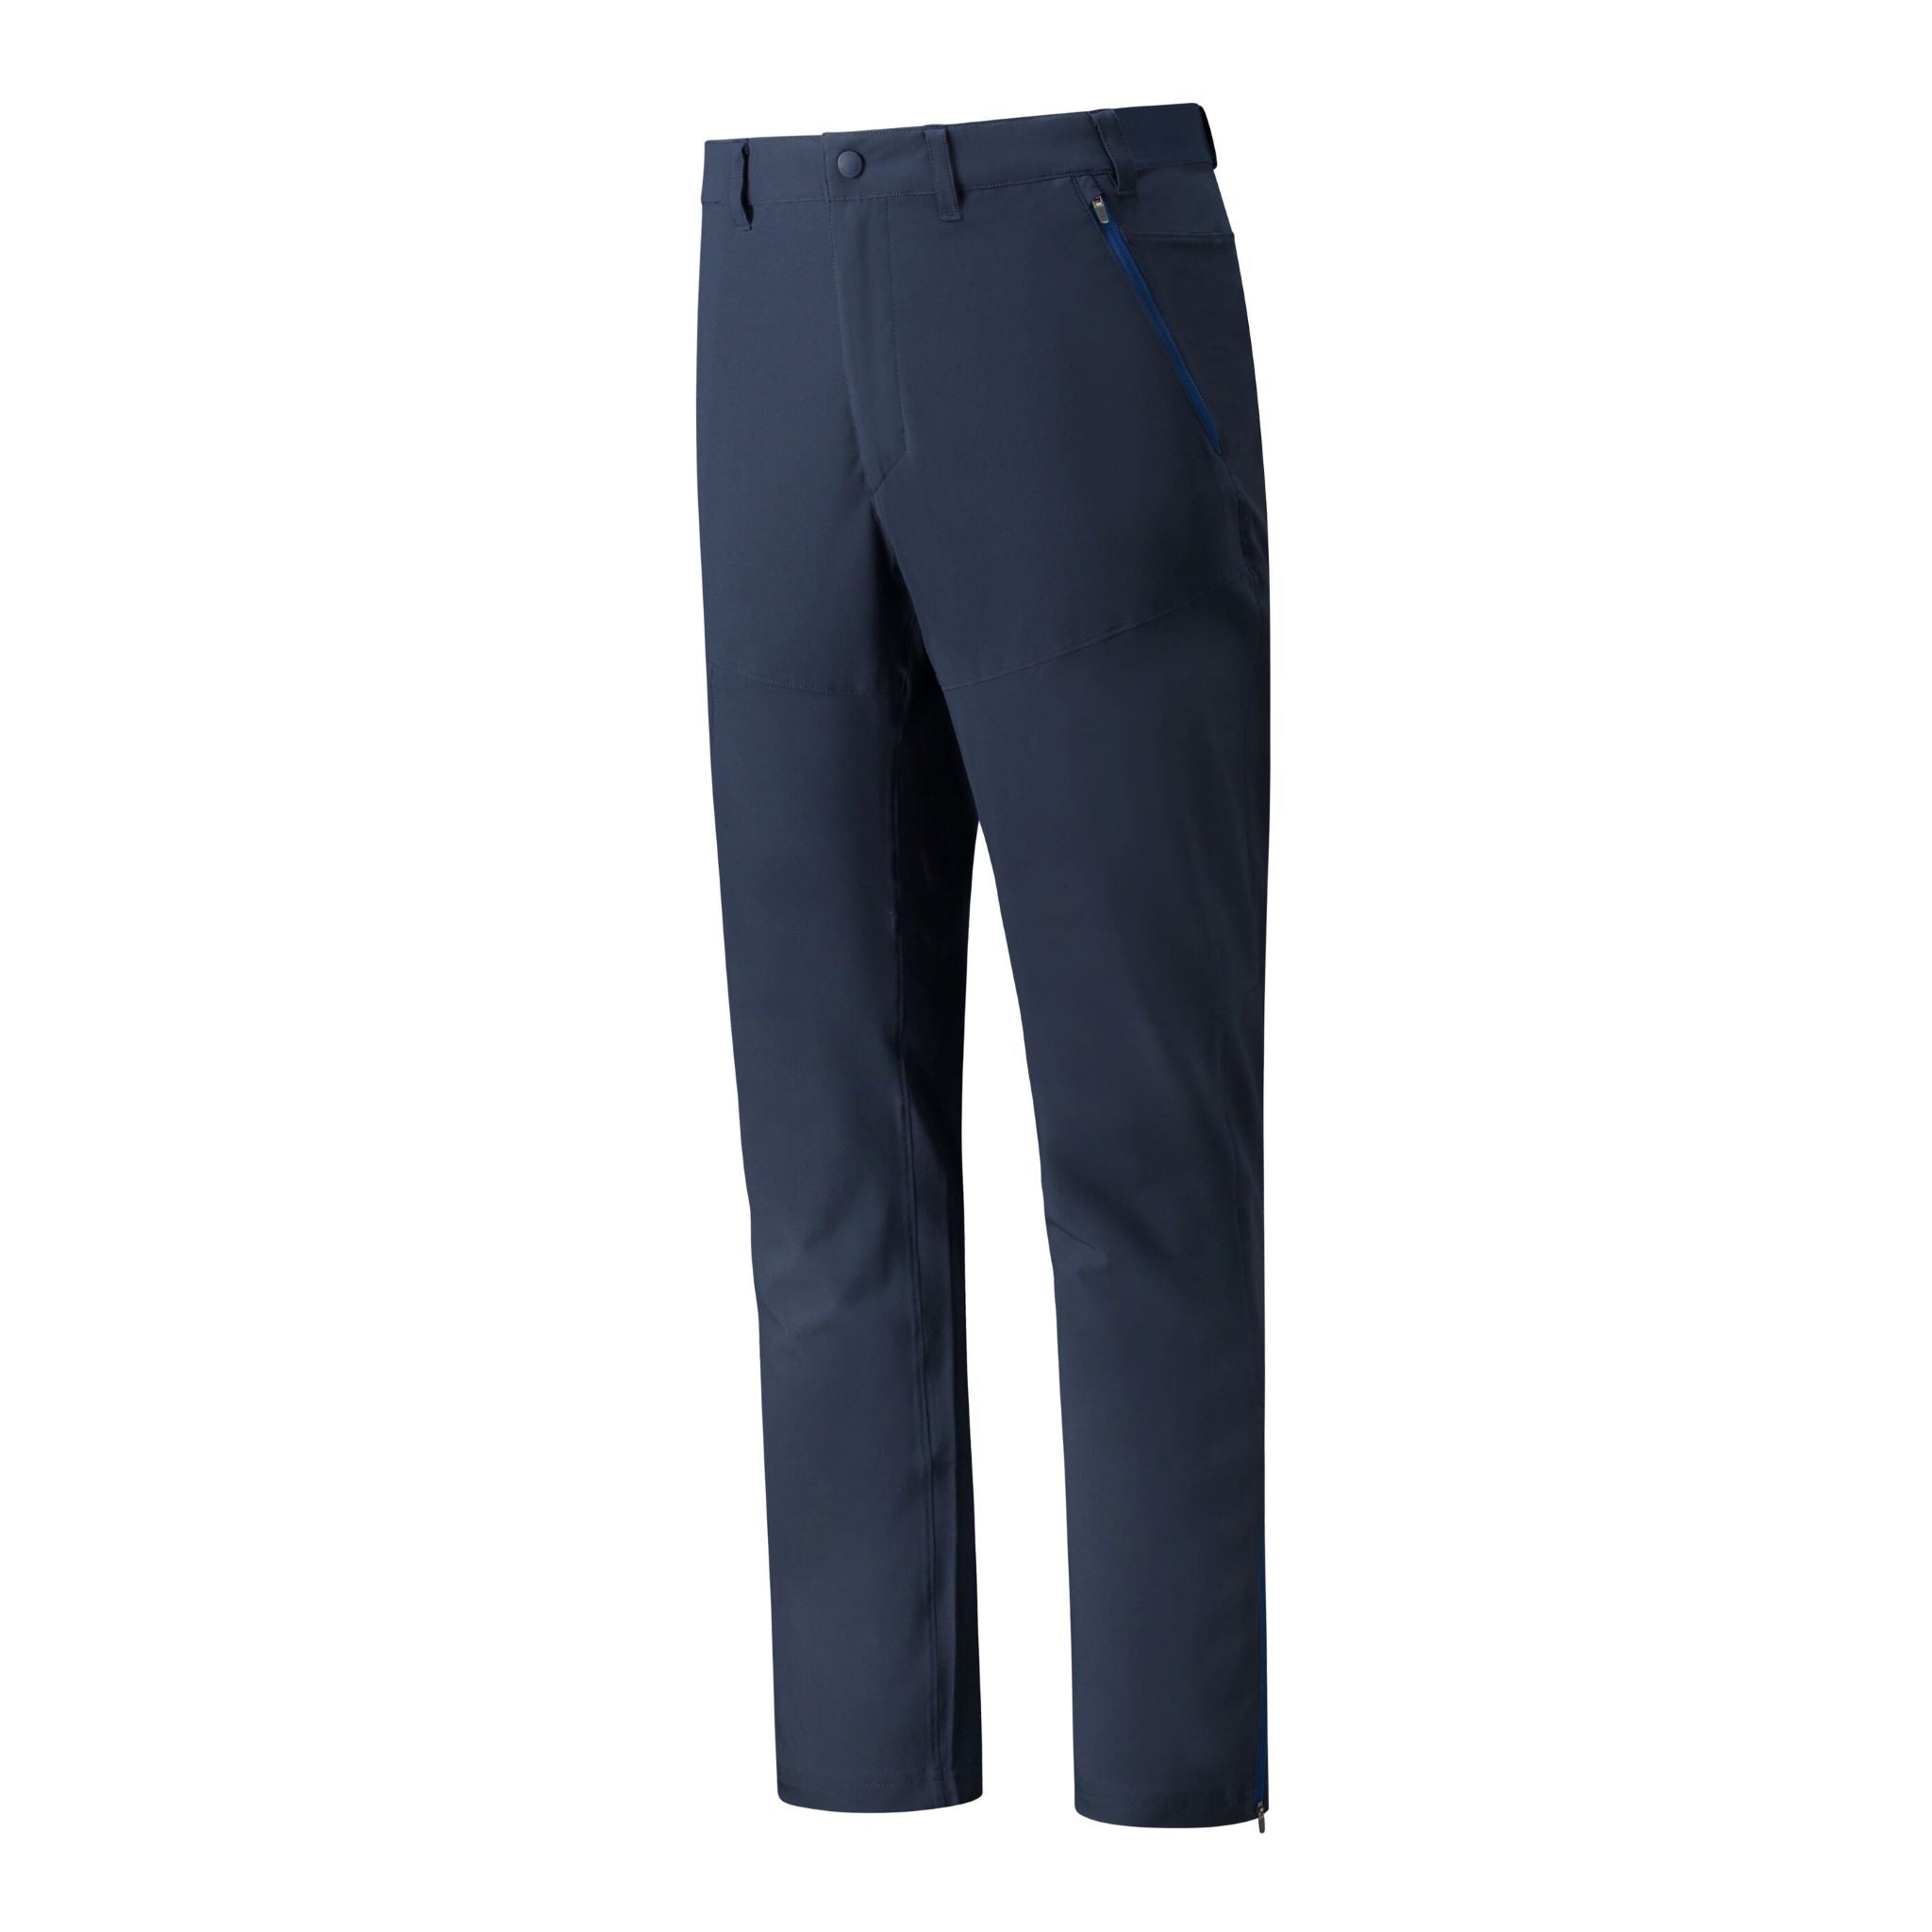 Altvia Trail Pant Men's – Feathered Friends